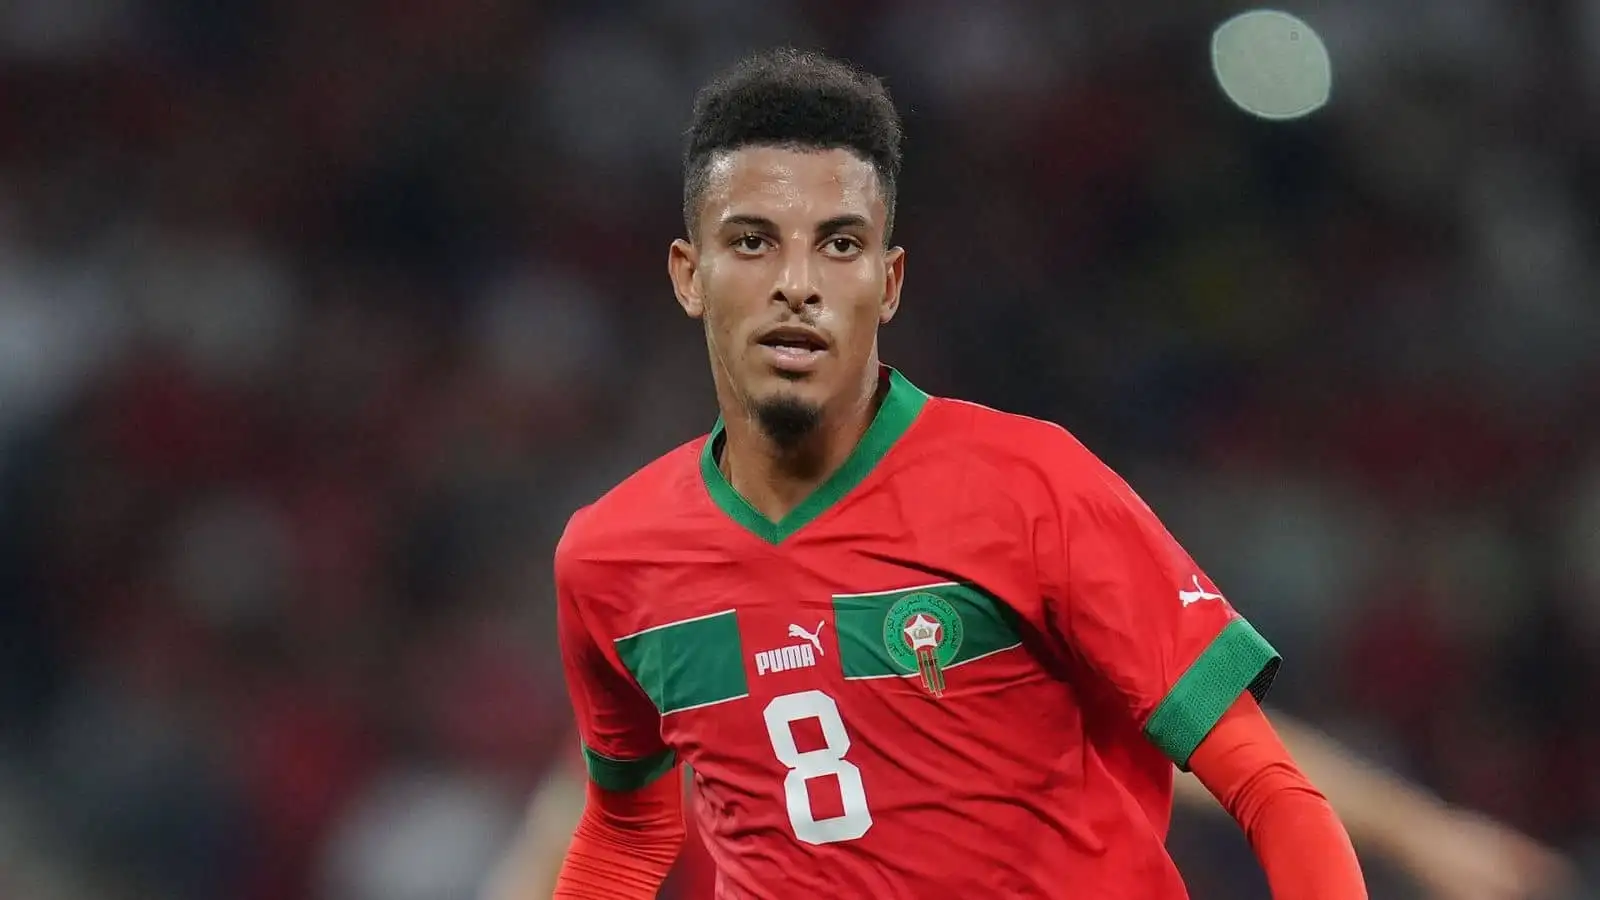 Azzedine Ounahi of Morocco during the international friendly match between Morocco and Chile played at RCDE Stadium on September 23, 2022 in Barcelona, Spain